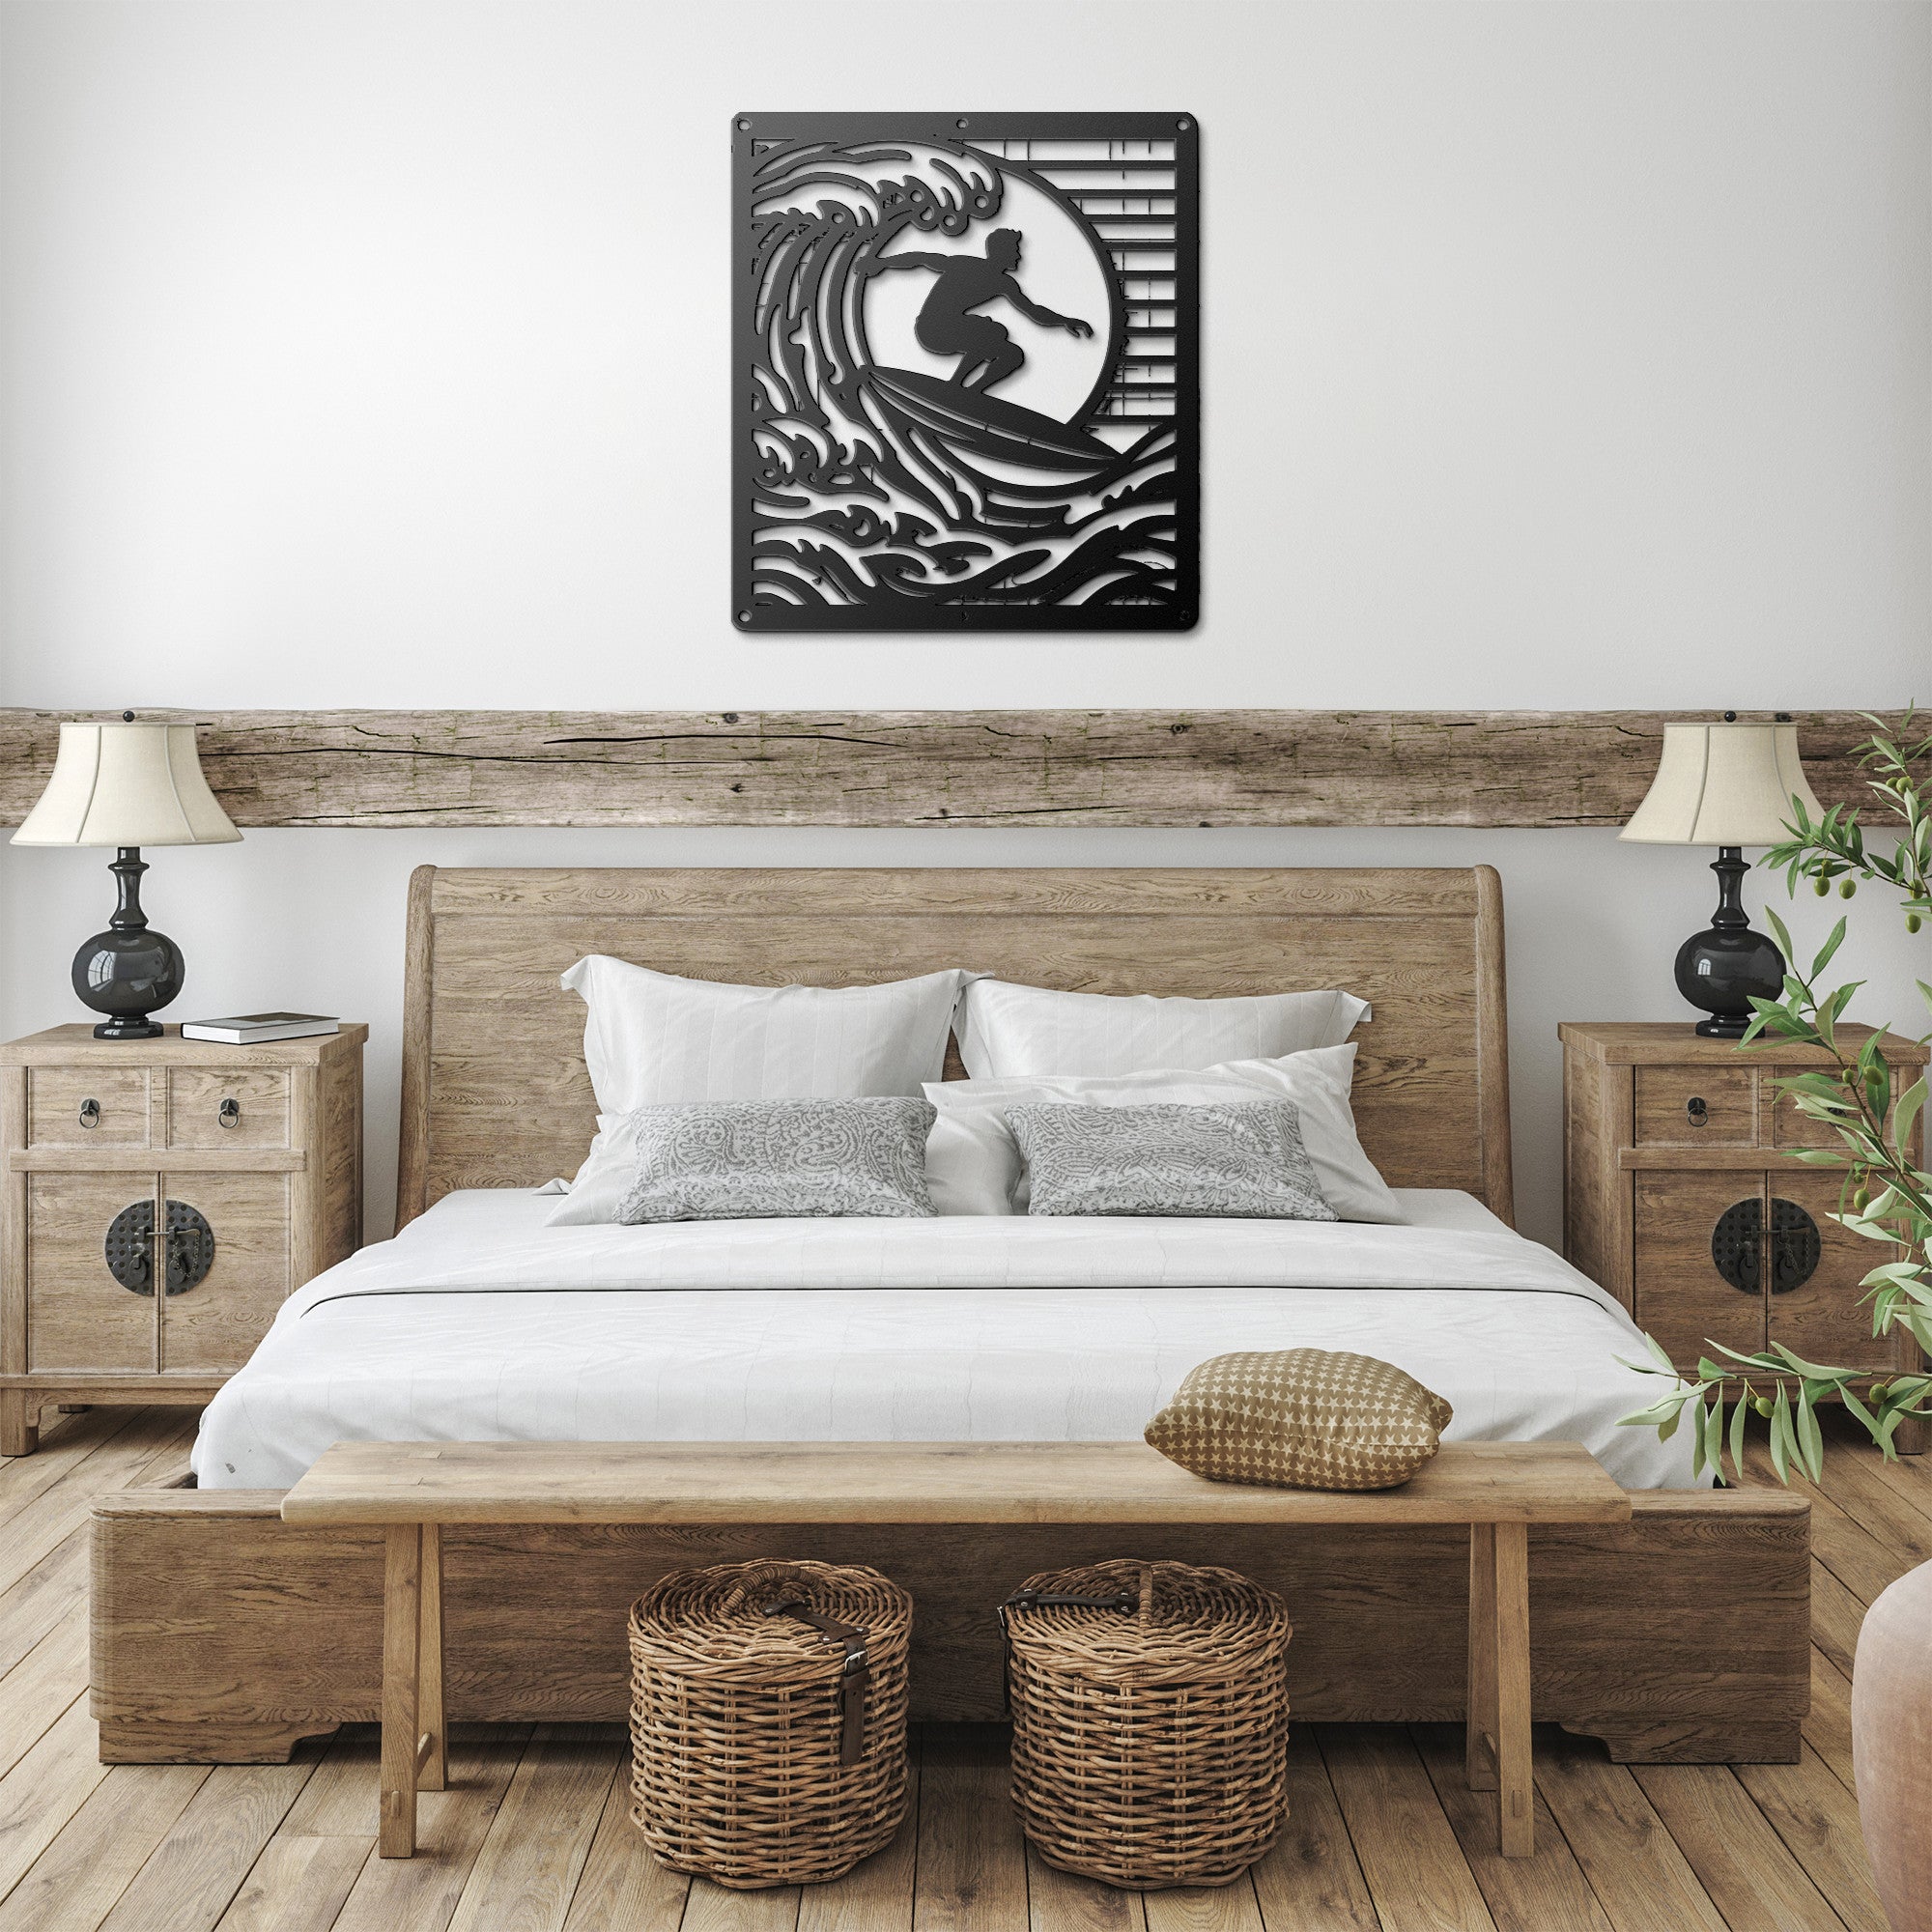 Eternal Wave - Durable Surf-Themed Metal Sign